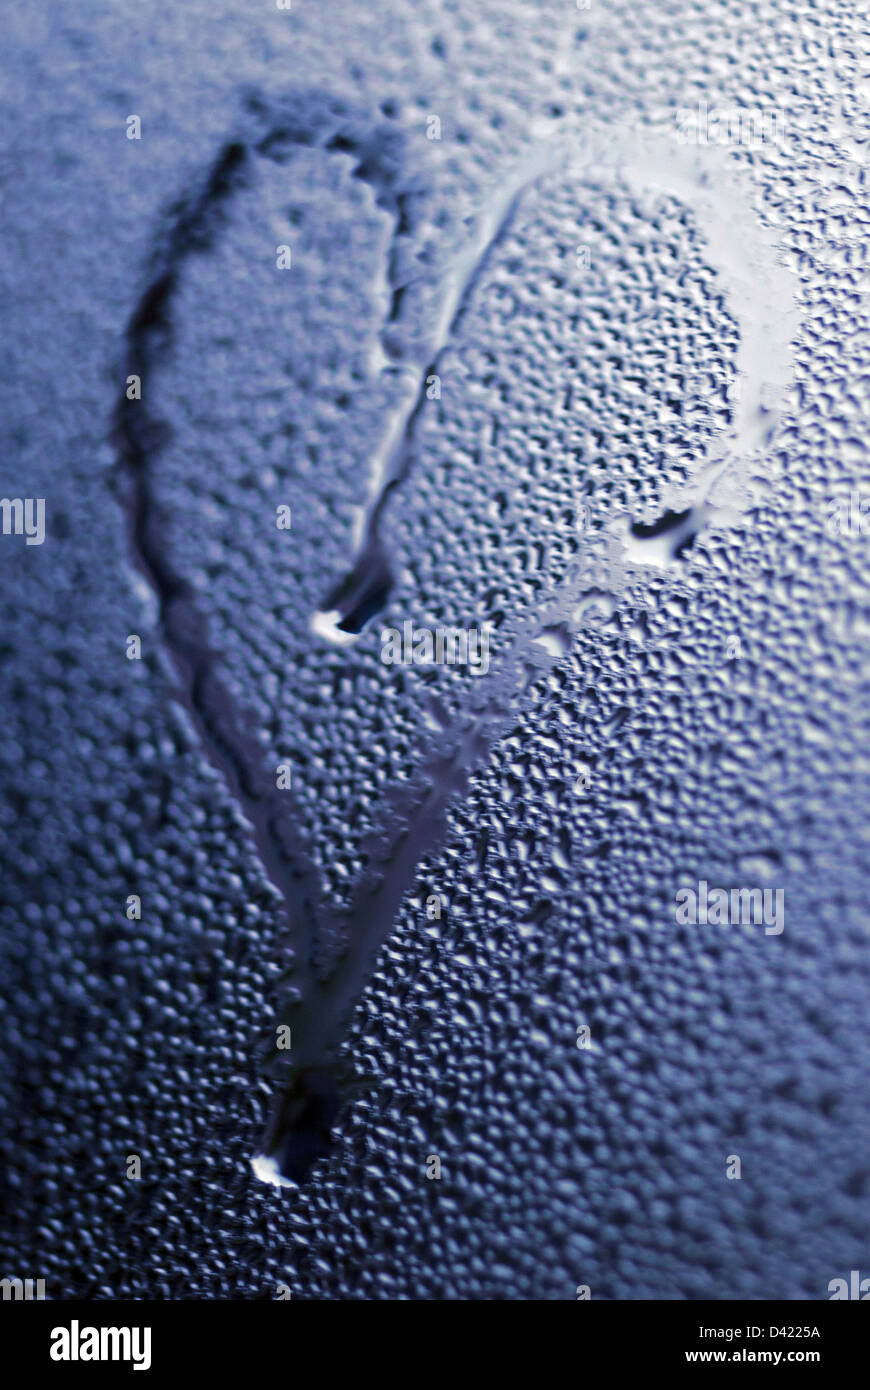 Heart shape in condensation Stock Photo